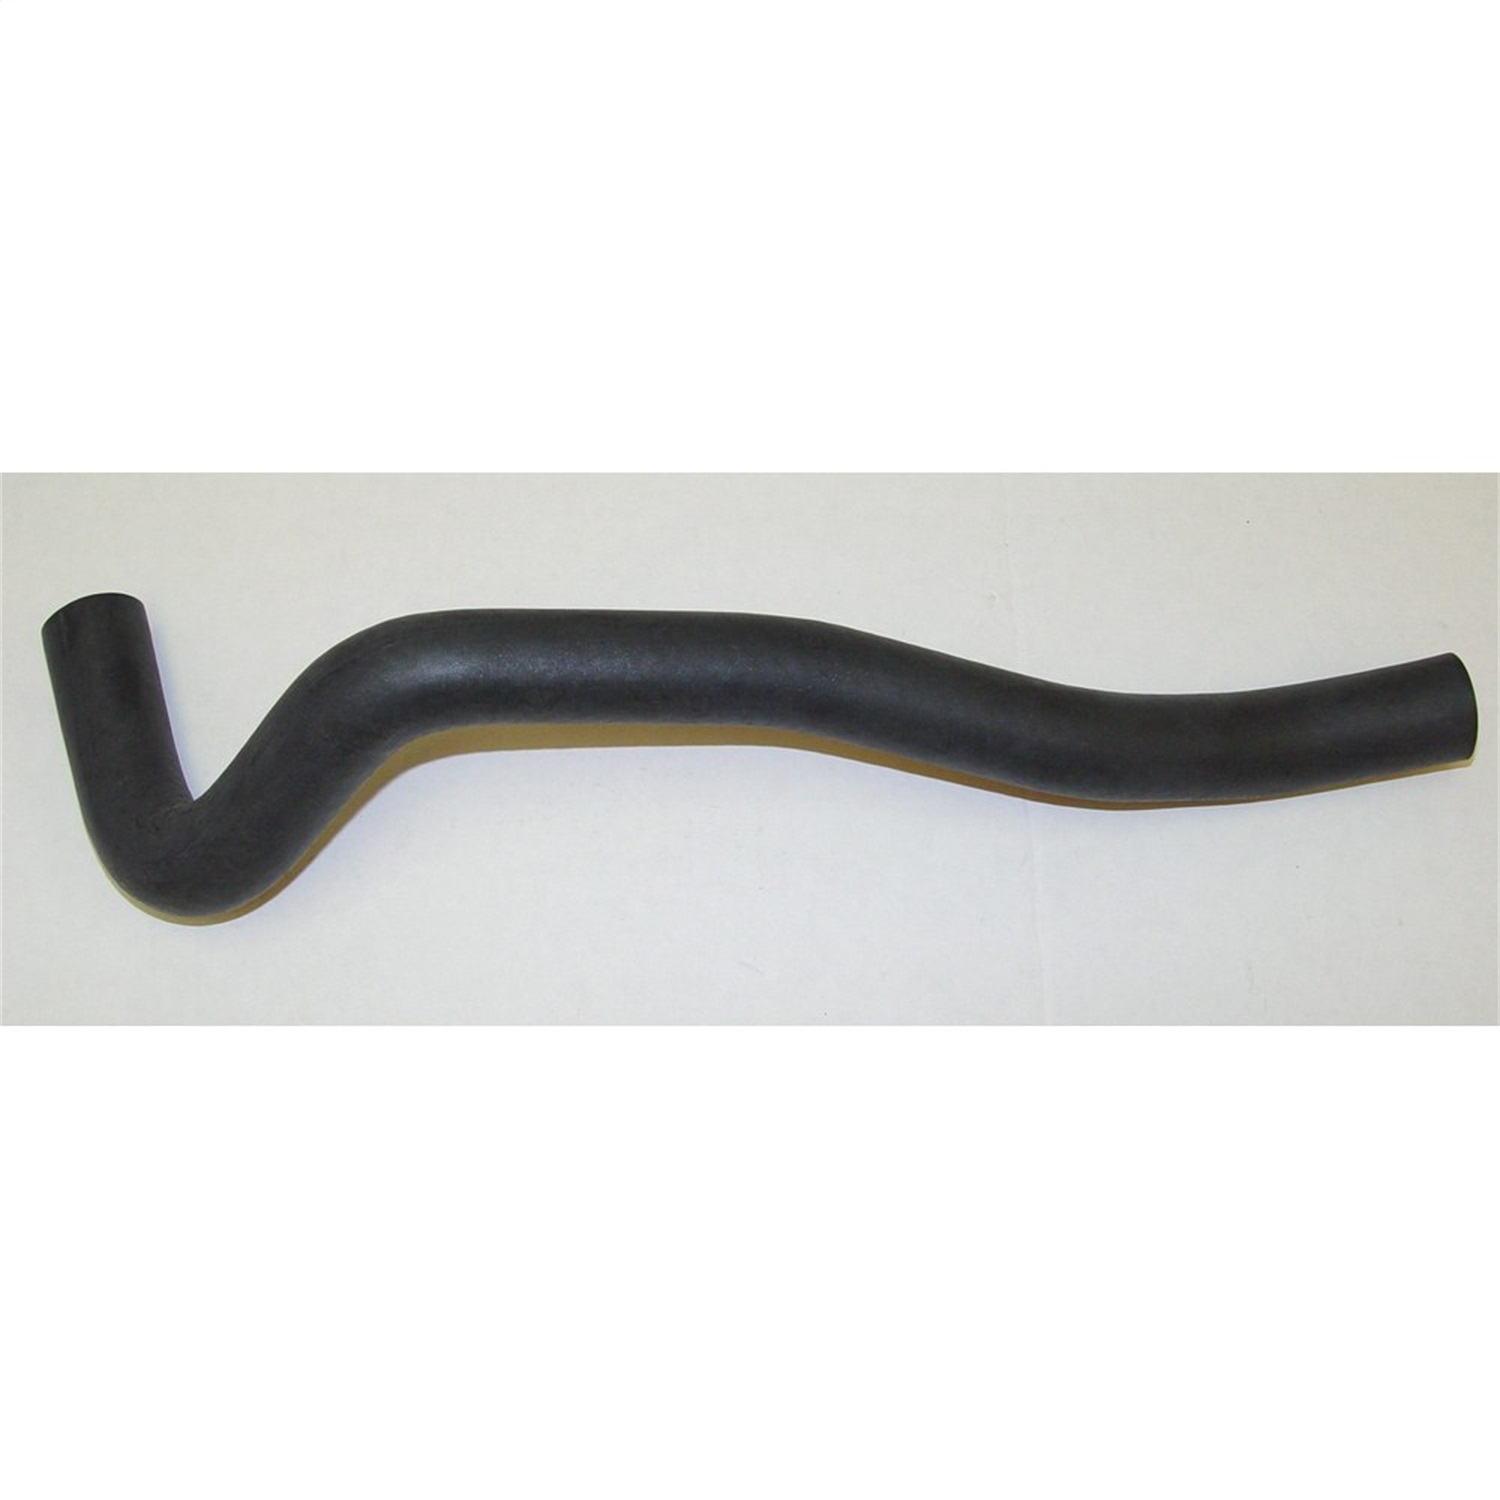 Omix This Replacement Gas Filler Vent Hose From Omix Fits 87-90 Jeep Wrangler Yj., BKGF-17741.04